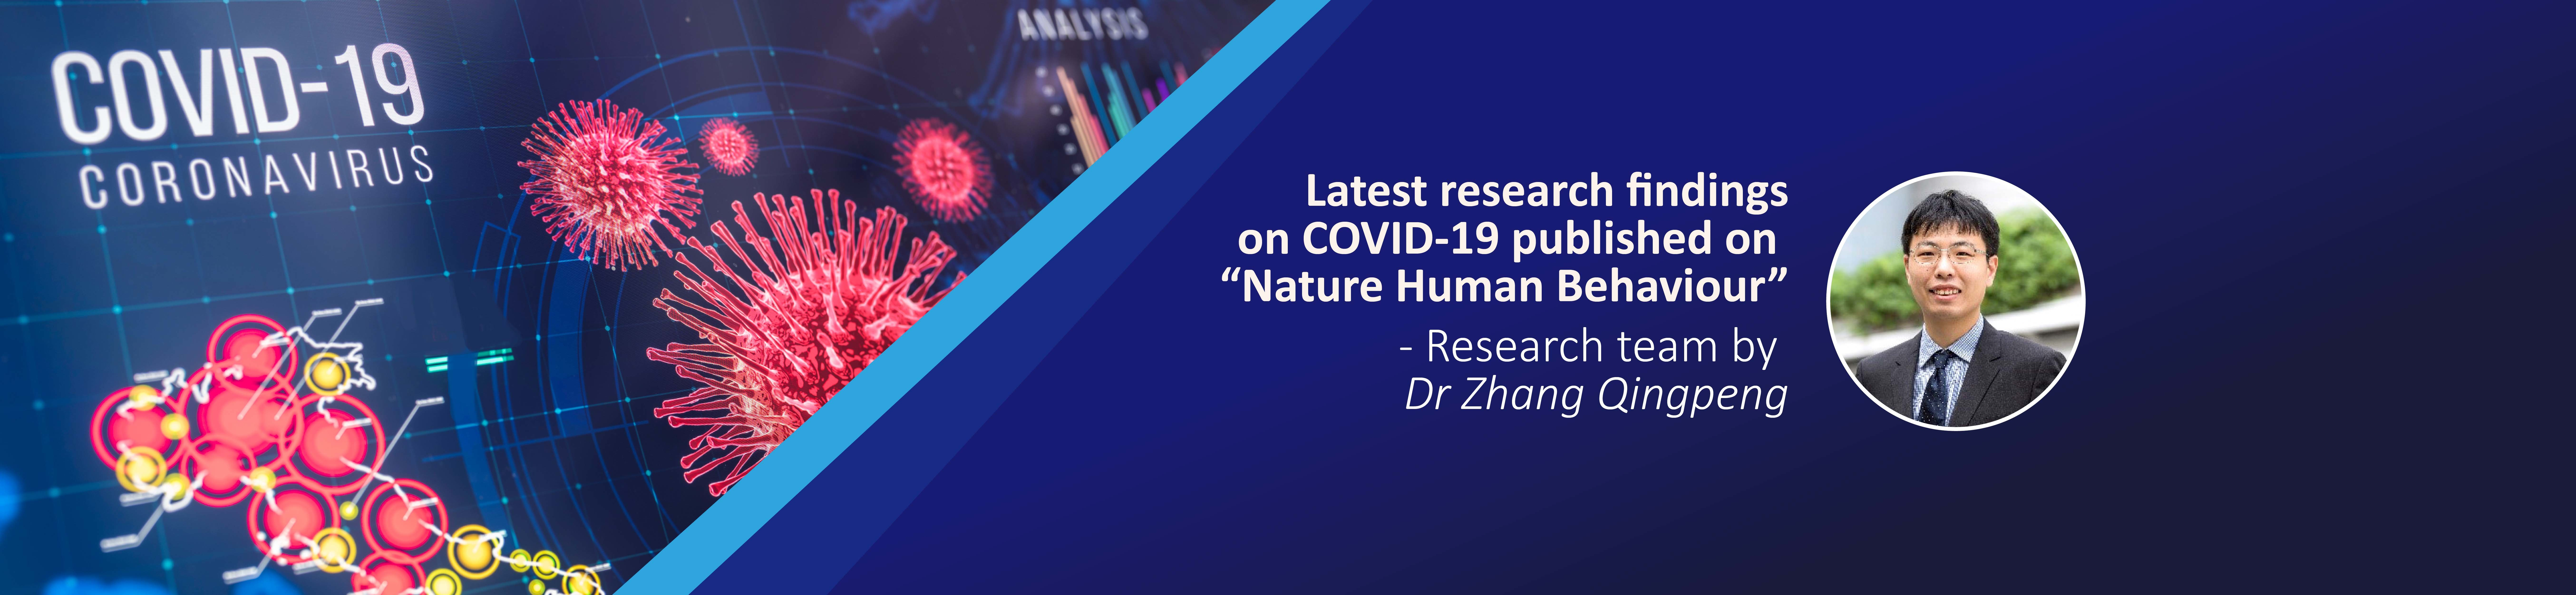 A research paper of Dr Zhang Qingpeng’s team on COVID-19 published in Nature Human Behaviour